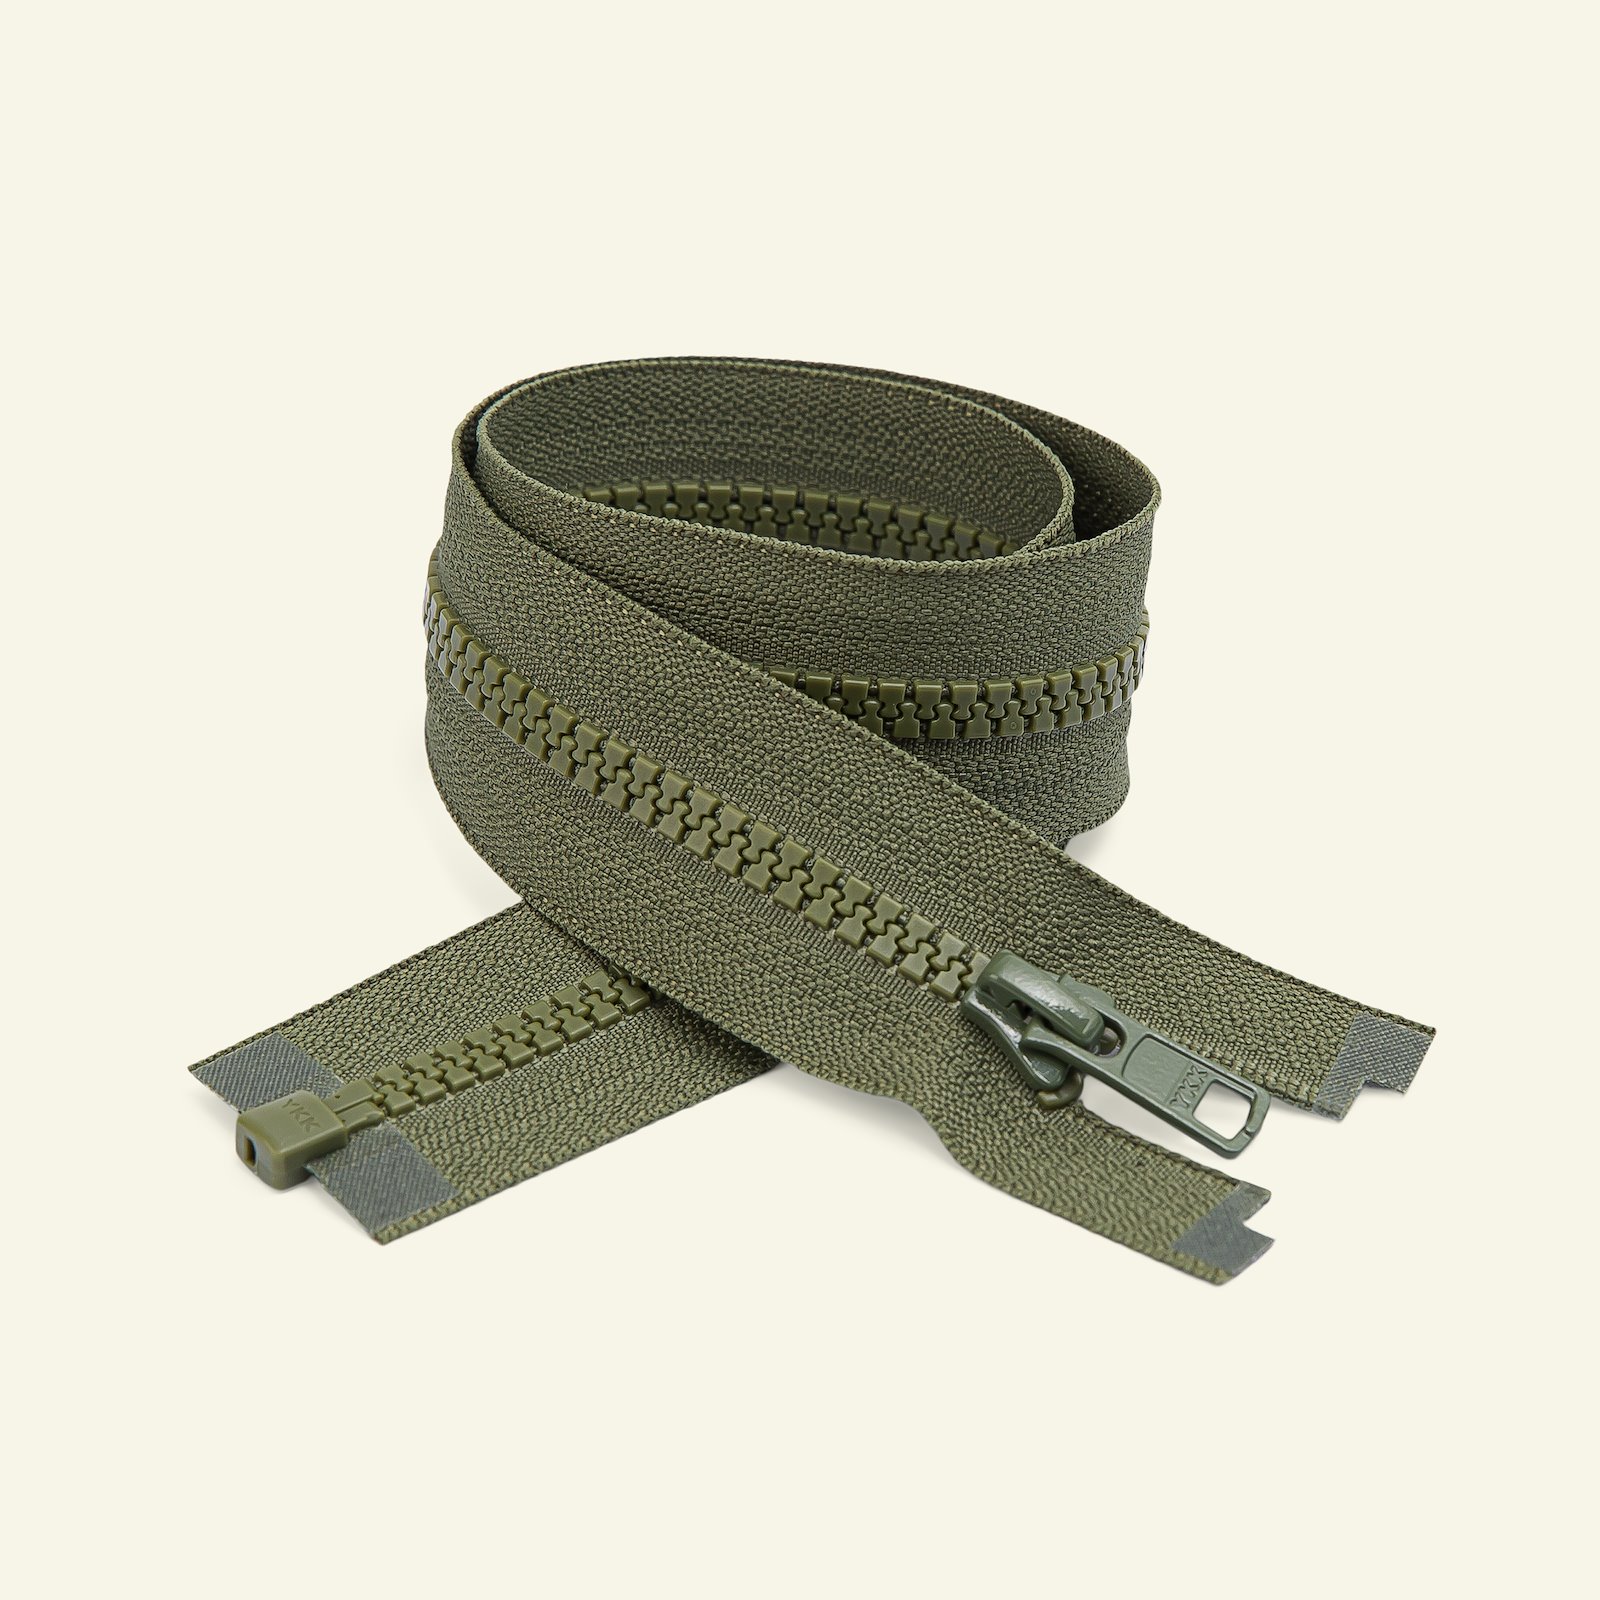 YKK zip 6mm open end 35cm army x50033_pack